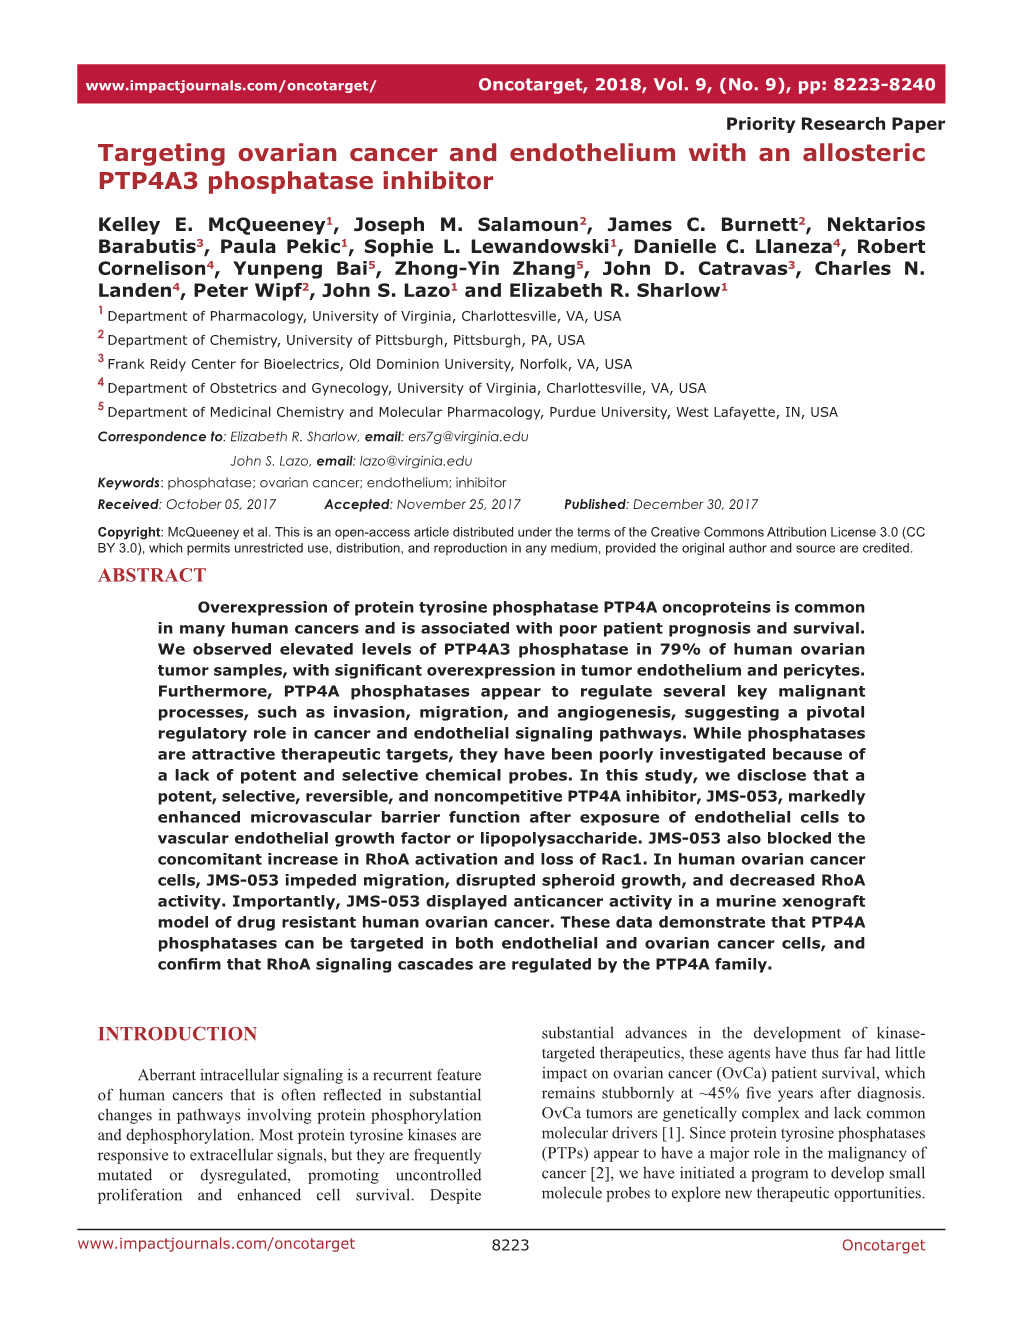 Targeting Ovarian Cancer and Endothelium with an Allosteric PTP4A3 Phosphatase Inhibitor